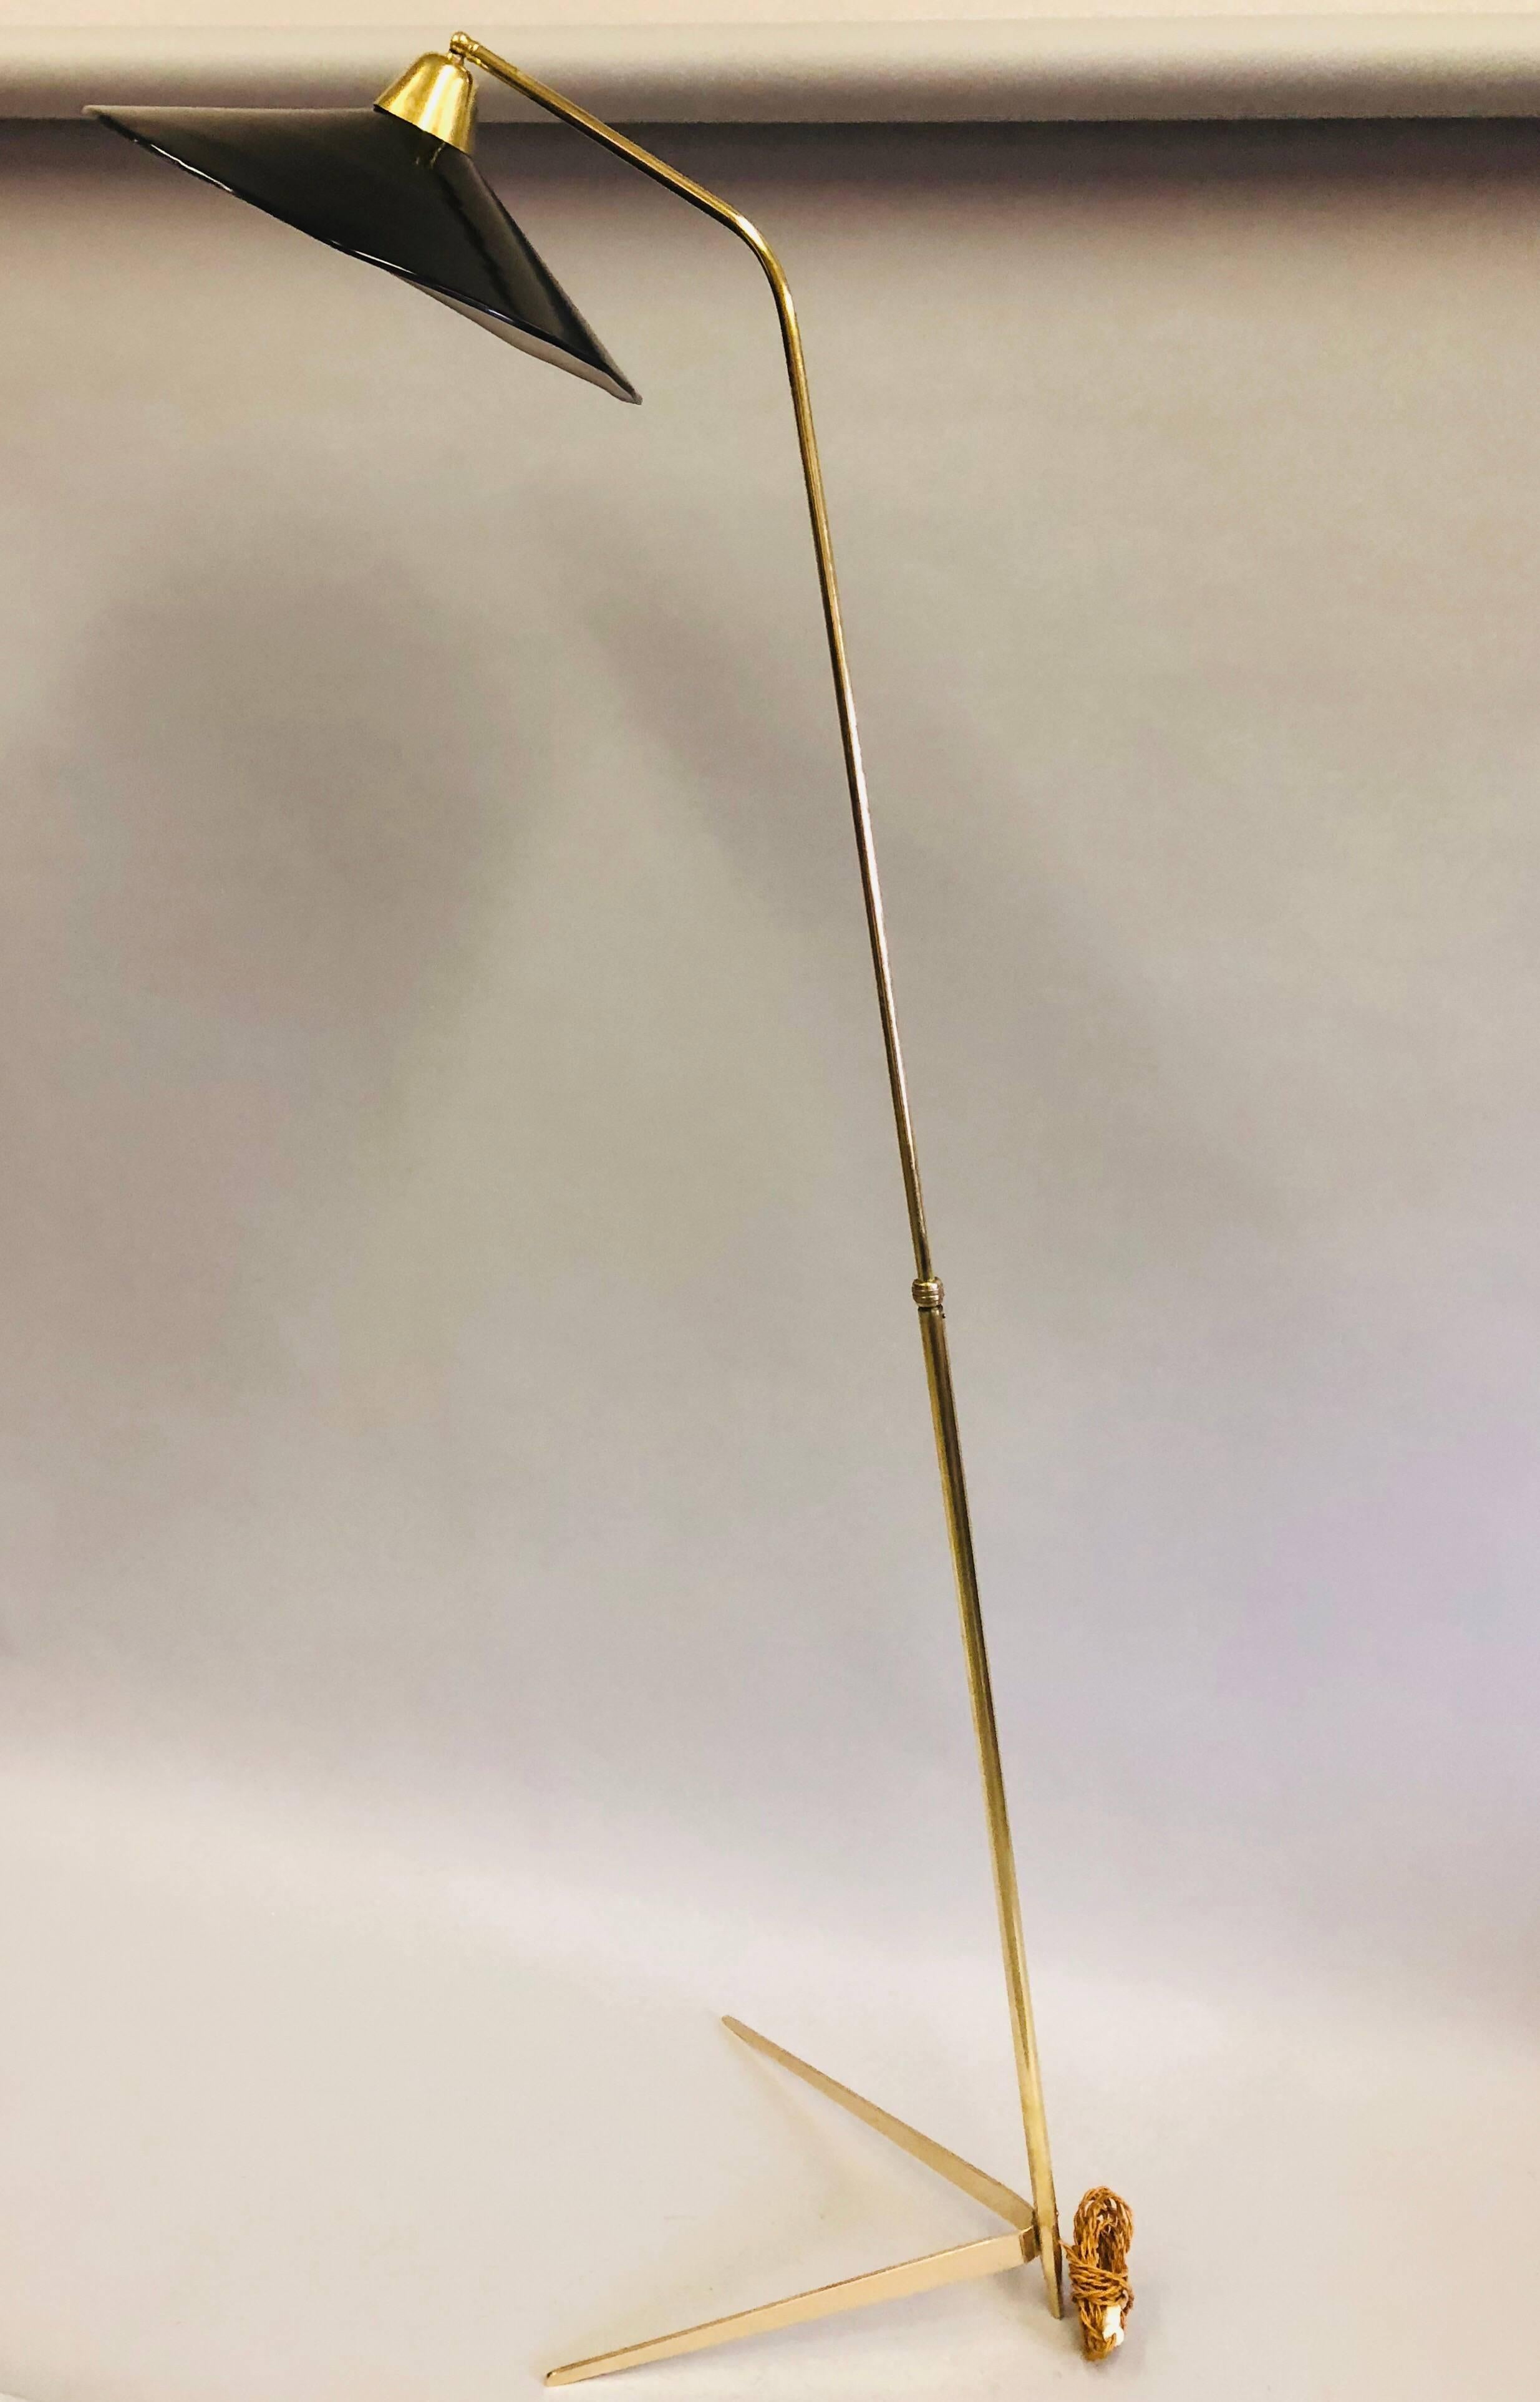 An important sculptural, Italian Mid-Century Modern floor lamp in solid brass with an elegant, tapering, tripod base in the form a hairpin and round, black enameled metal shade. The stem and shade cantilever over the base at a delicate angle.